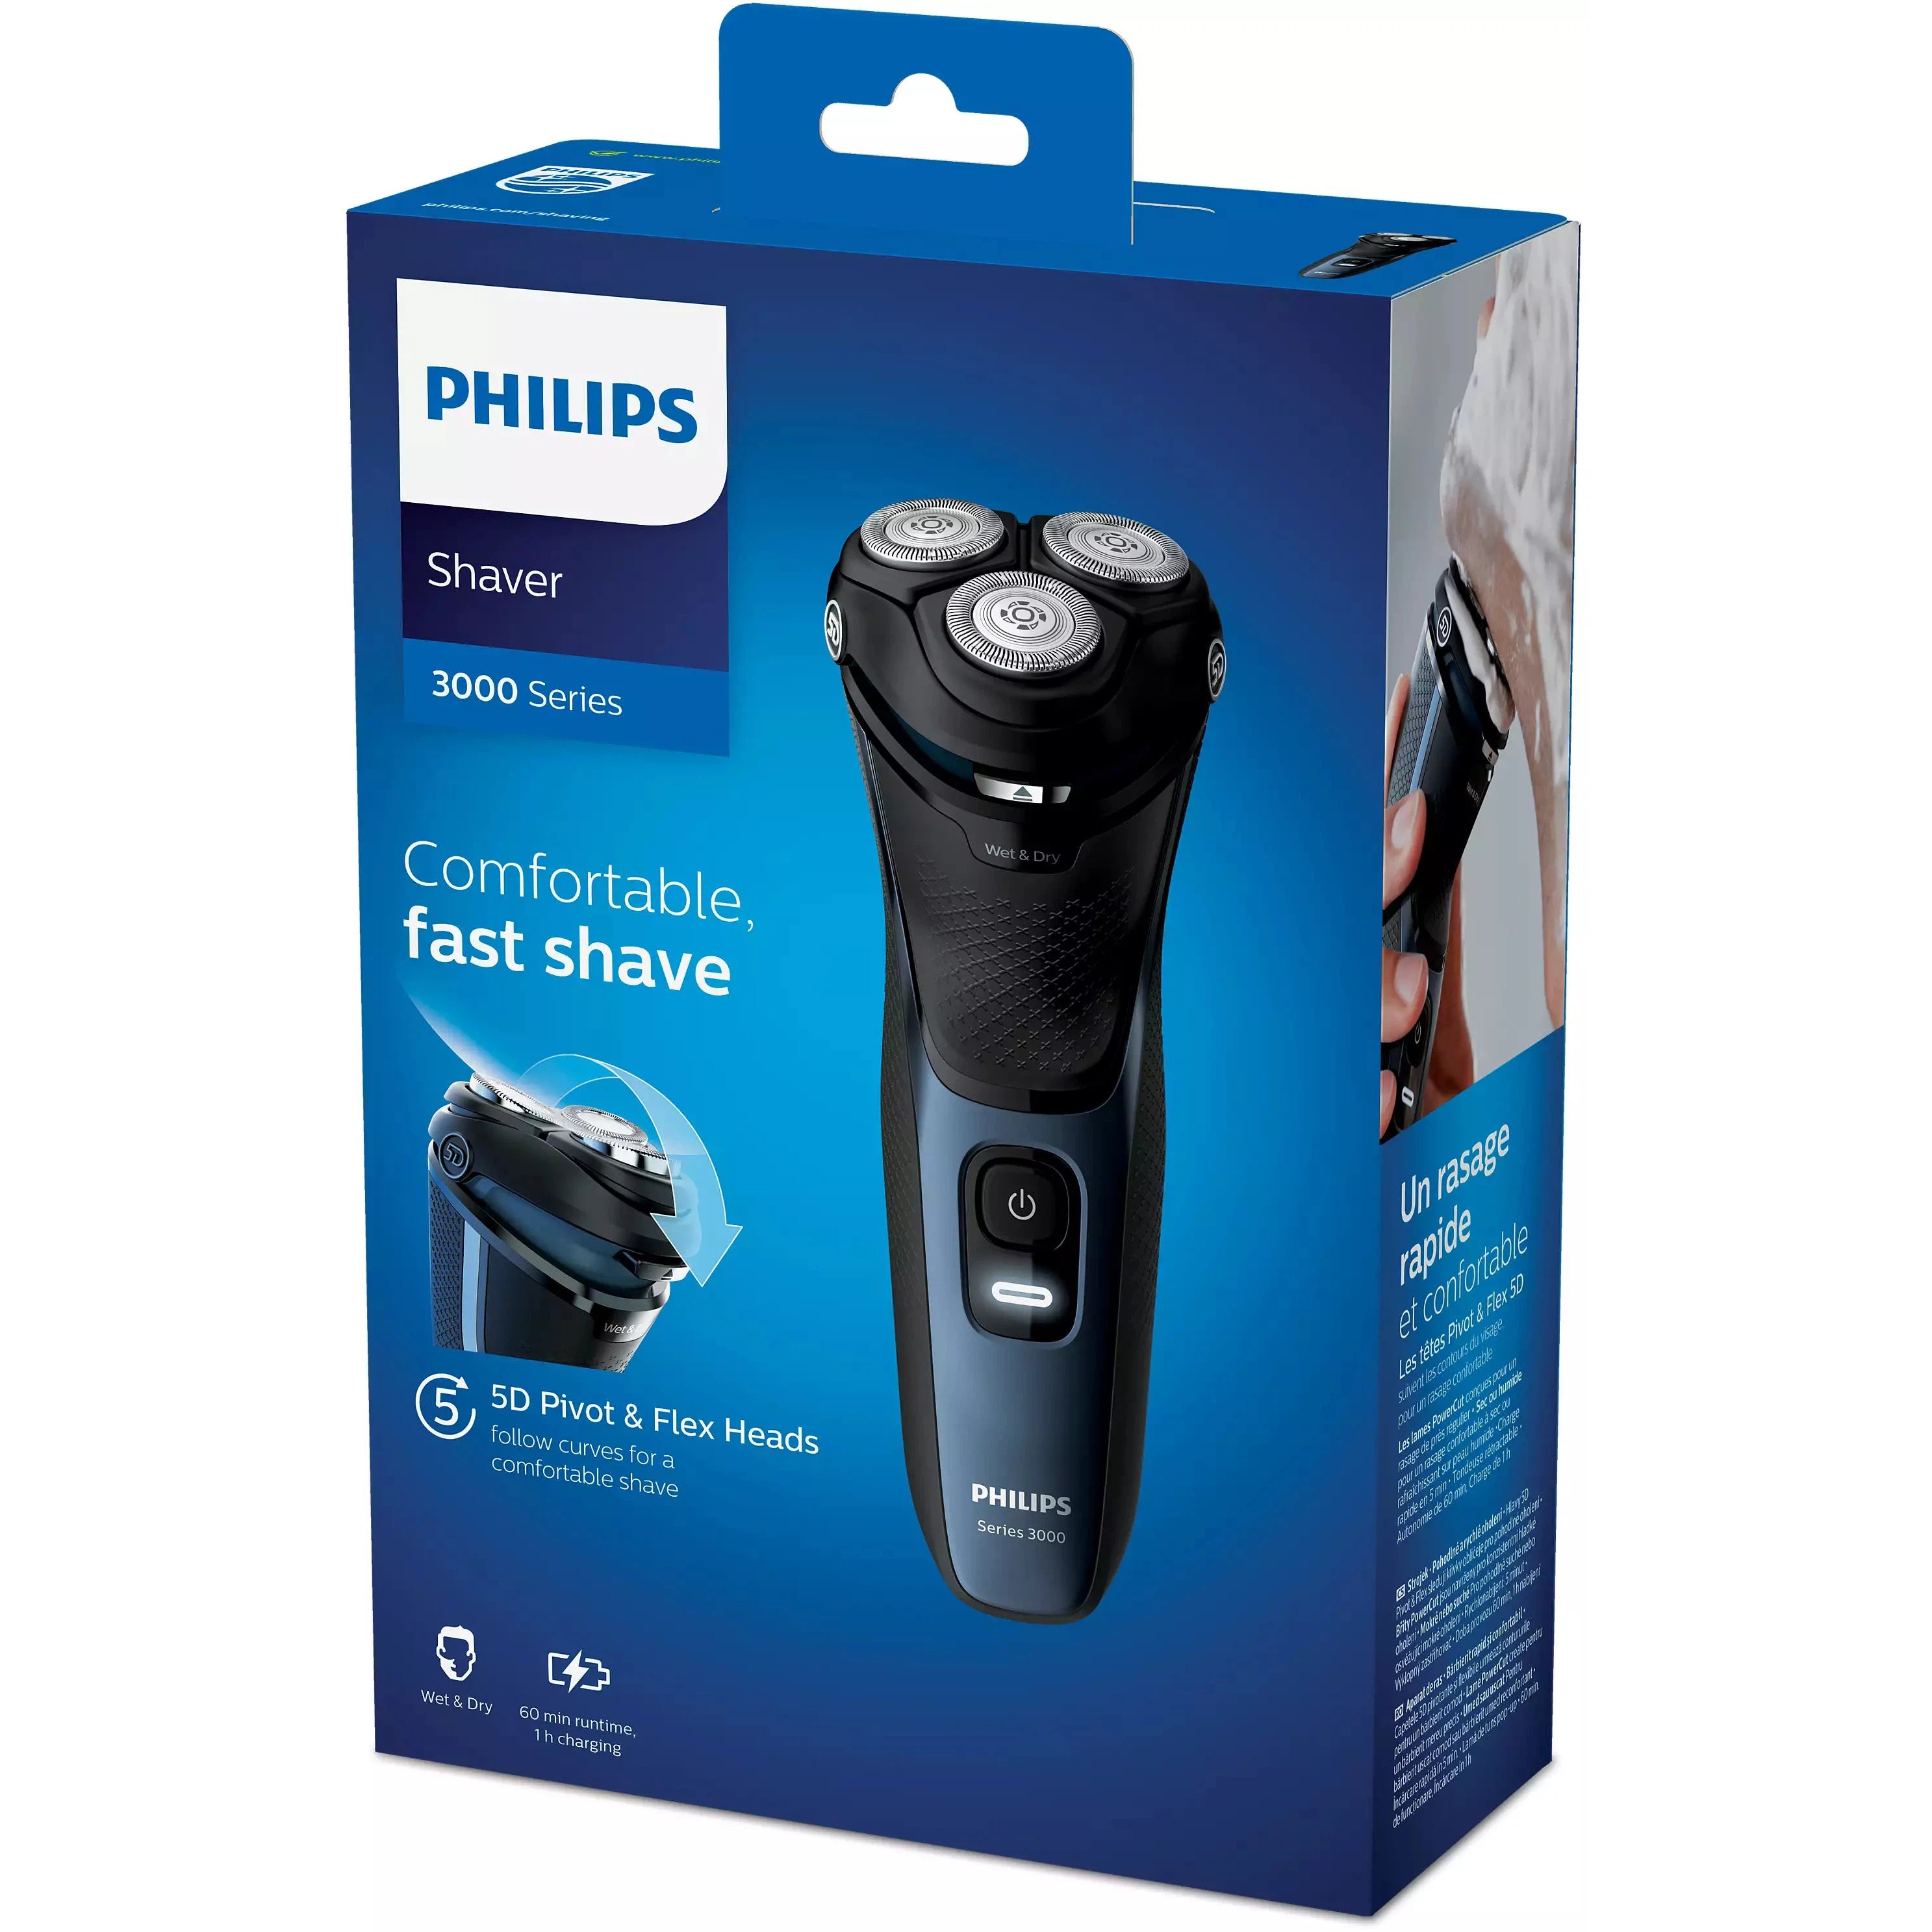 Philips S3134/51 Series 3000 Wet or Dry Electric Shaver - 5D Pivot & Flex Heads